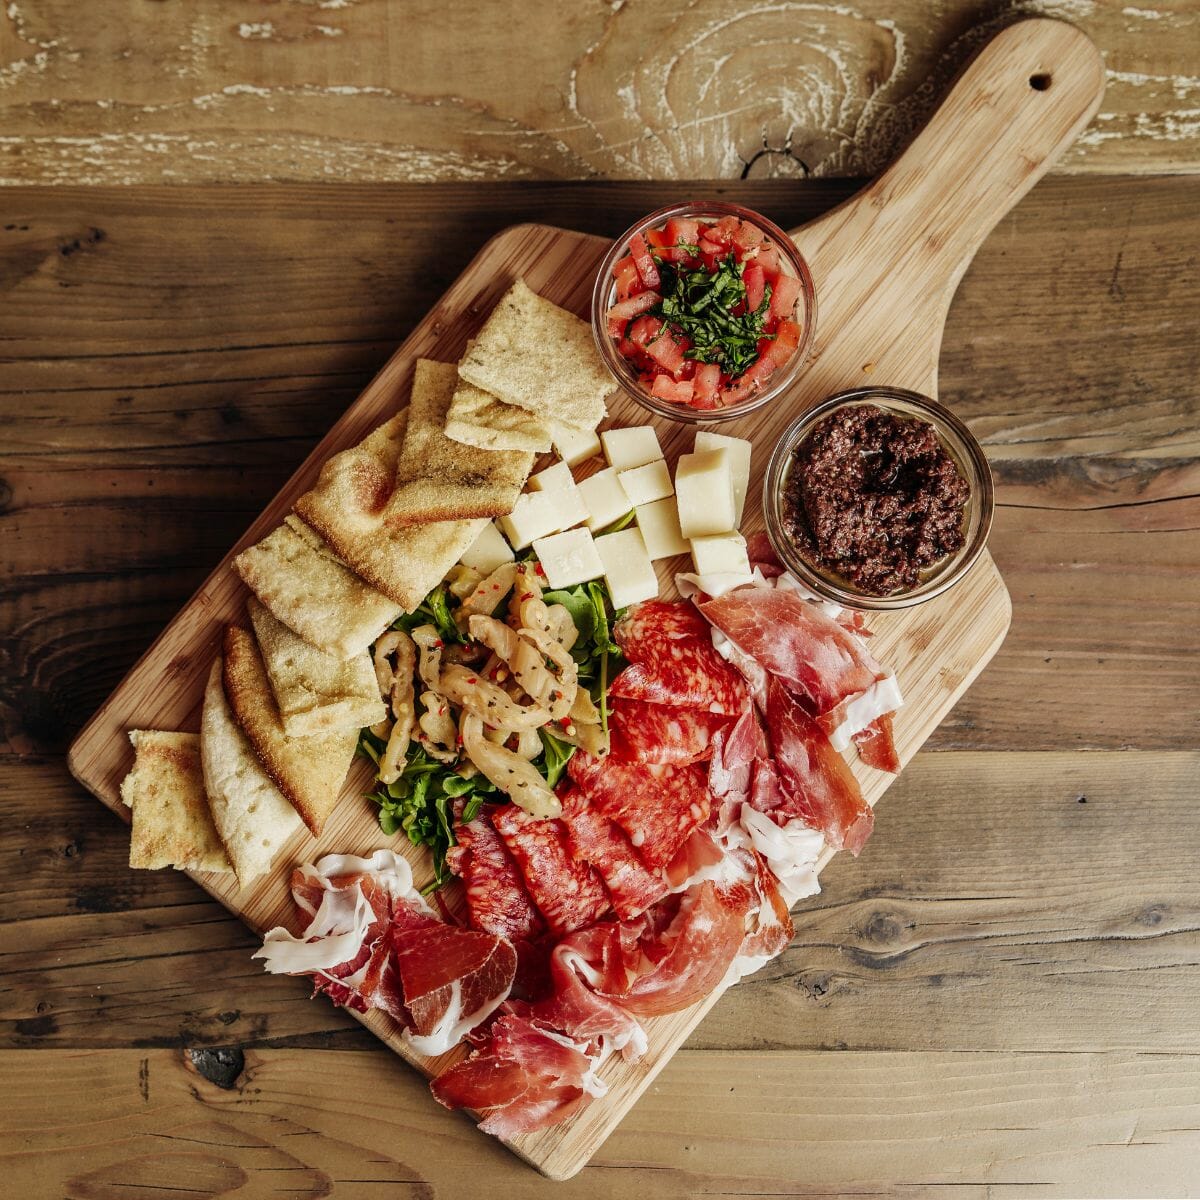 top view of wooden charcuterie board no pork, with a variety of meats, cheese, and crackers